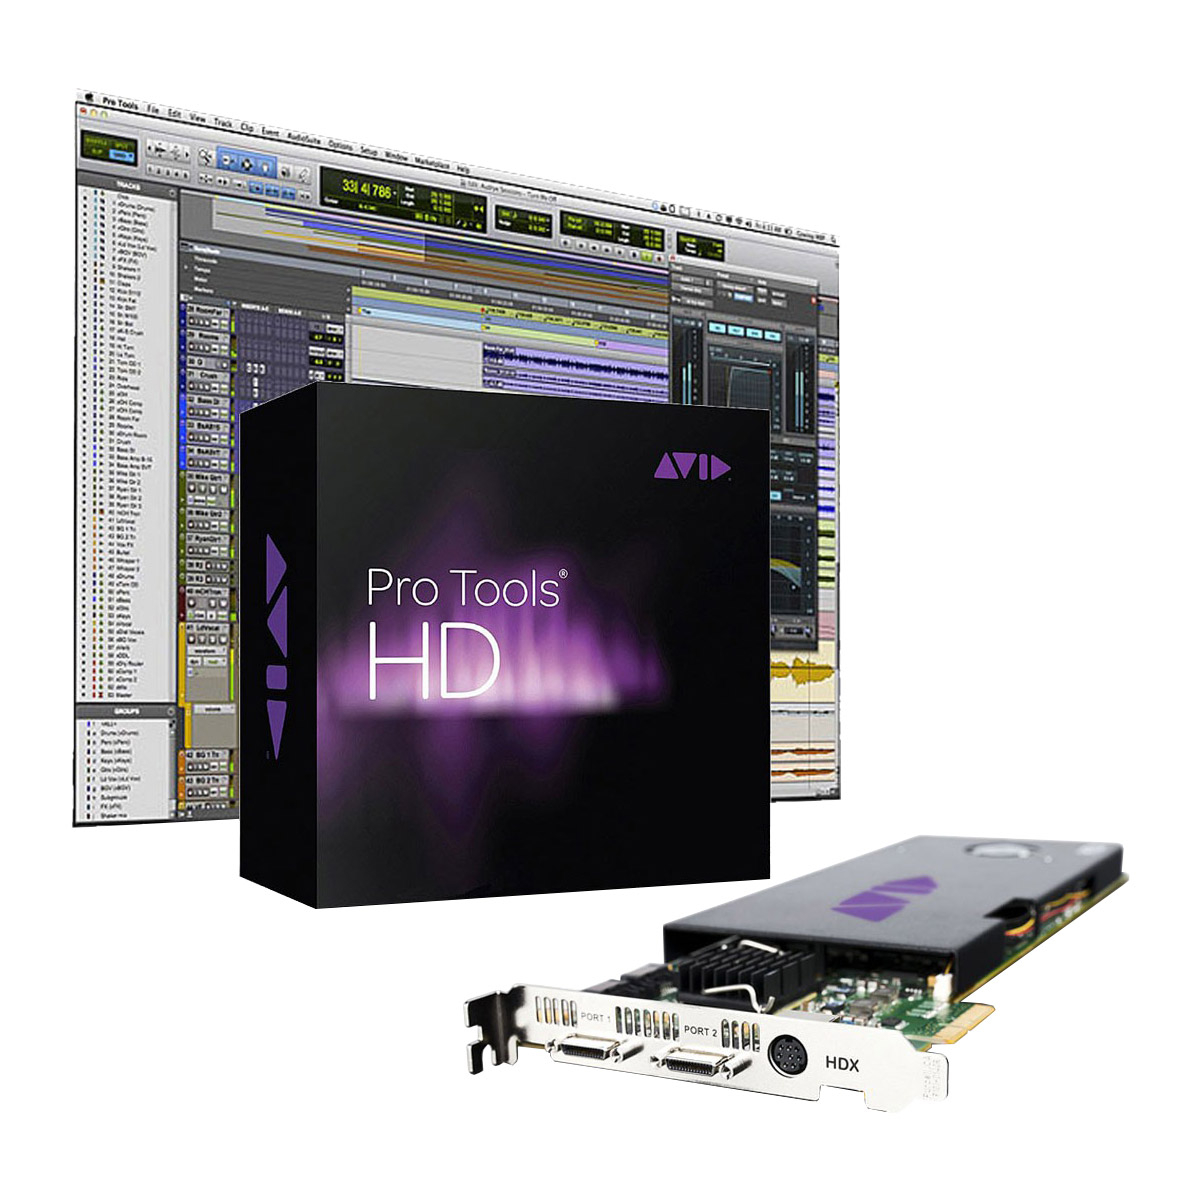 pro tools ultimate cracked download